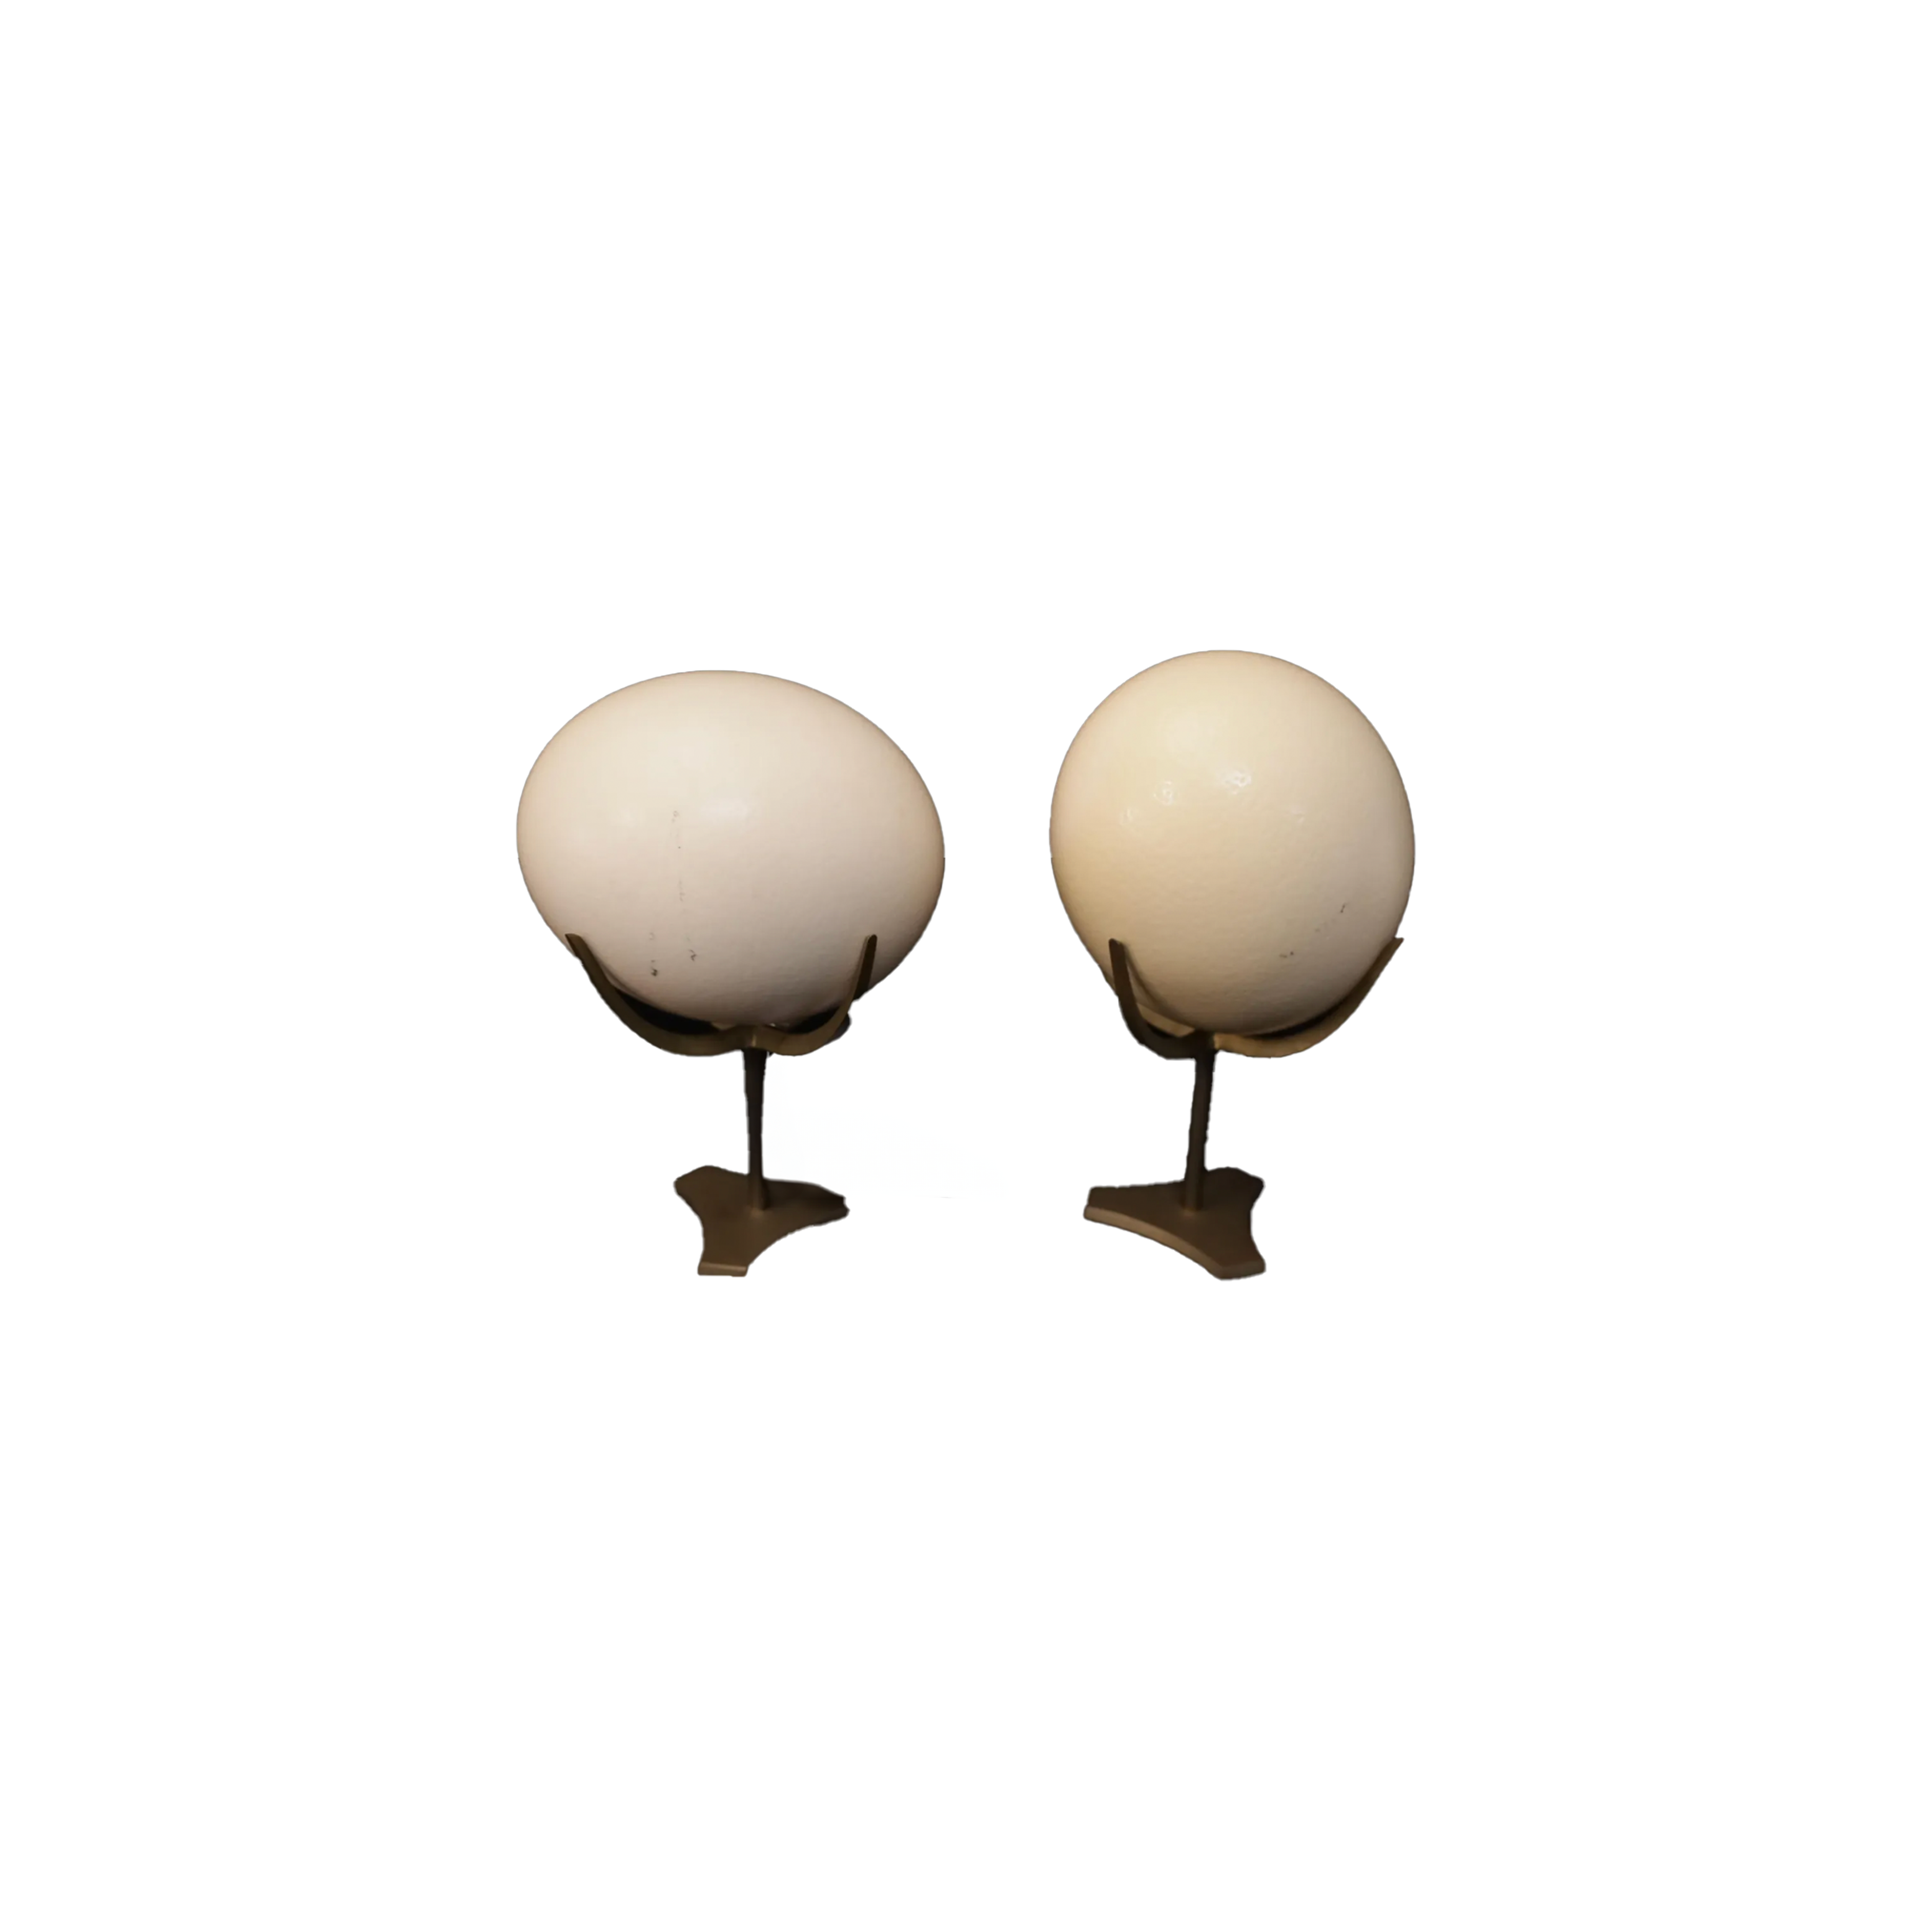 Ostrich Eggs with Brass Display Stands - Pair